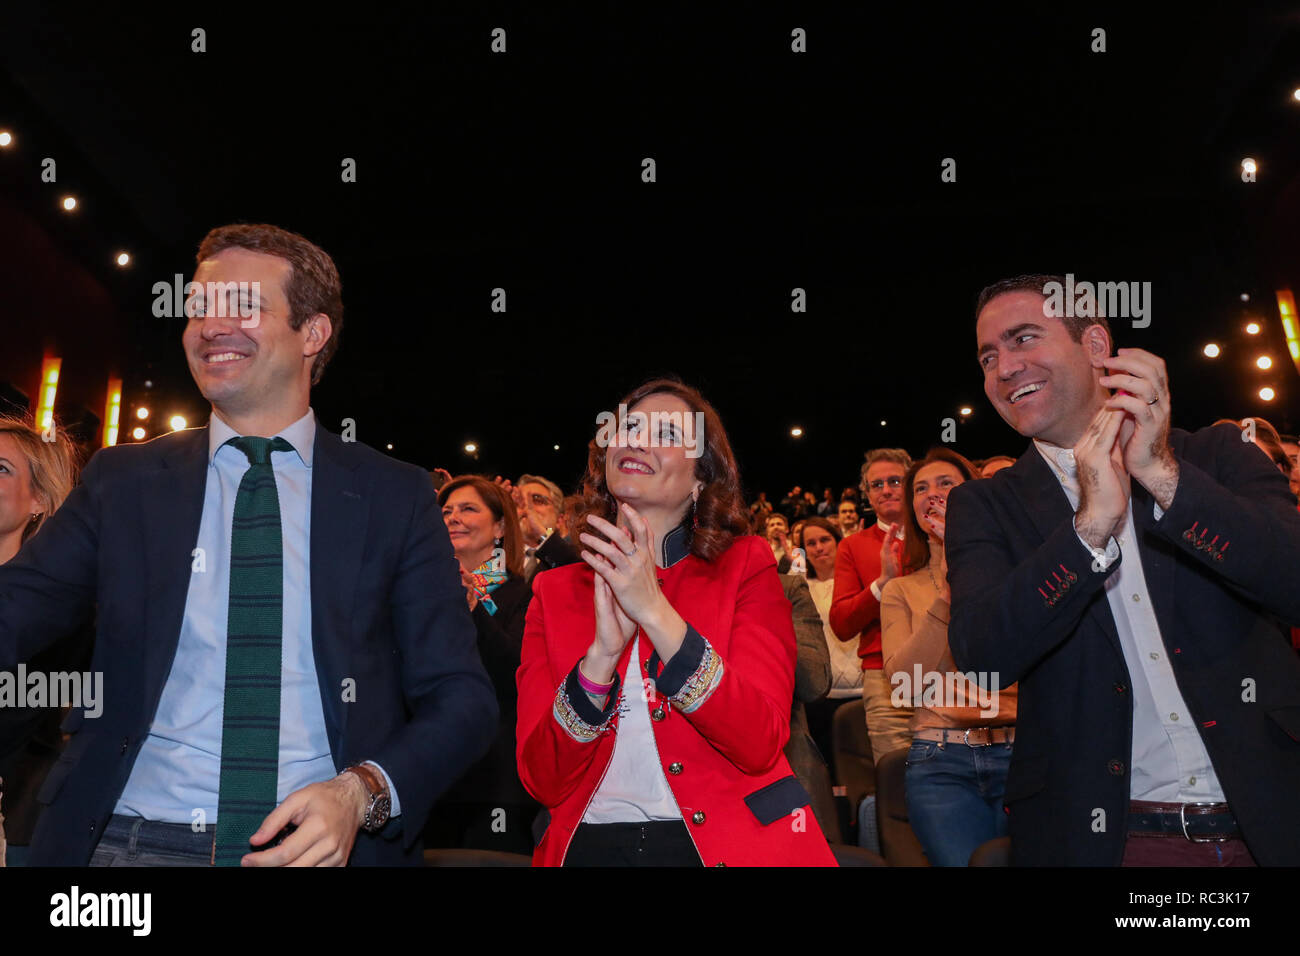 Madrid, Spain. 13th Janaury 2019. PABLO CASADO, Presidente del Partido Popular nacional, ISABEL DIAZ AYUSO, Candidata a Alcaldesa del Ayuntamiento de Madrid and TEODORO GARCIA EGEA, Secretario General del Partido Popular in the initial act of the presentation. The PP of Madrid has celebrated this Sunday a multitudinous act in the theater Goya the presentation of José Luis Martínez-Almeida and Isabel Díaz Ayuso that will be the candidates of the PP to the City council and the Community of Madrid, respectively, for the regional and local elections of May.Credit: Jesús Hellin/Alamy Live News Stock Photo